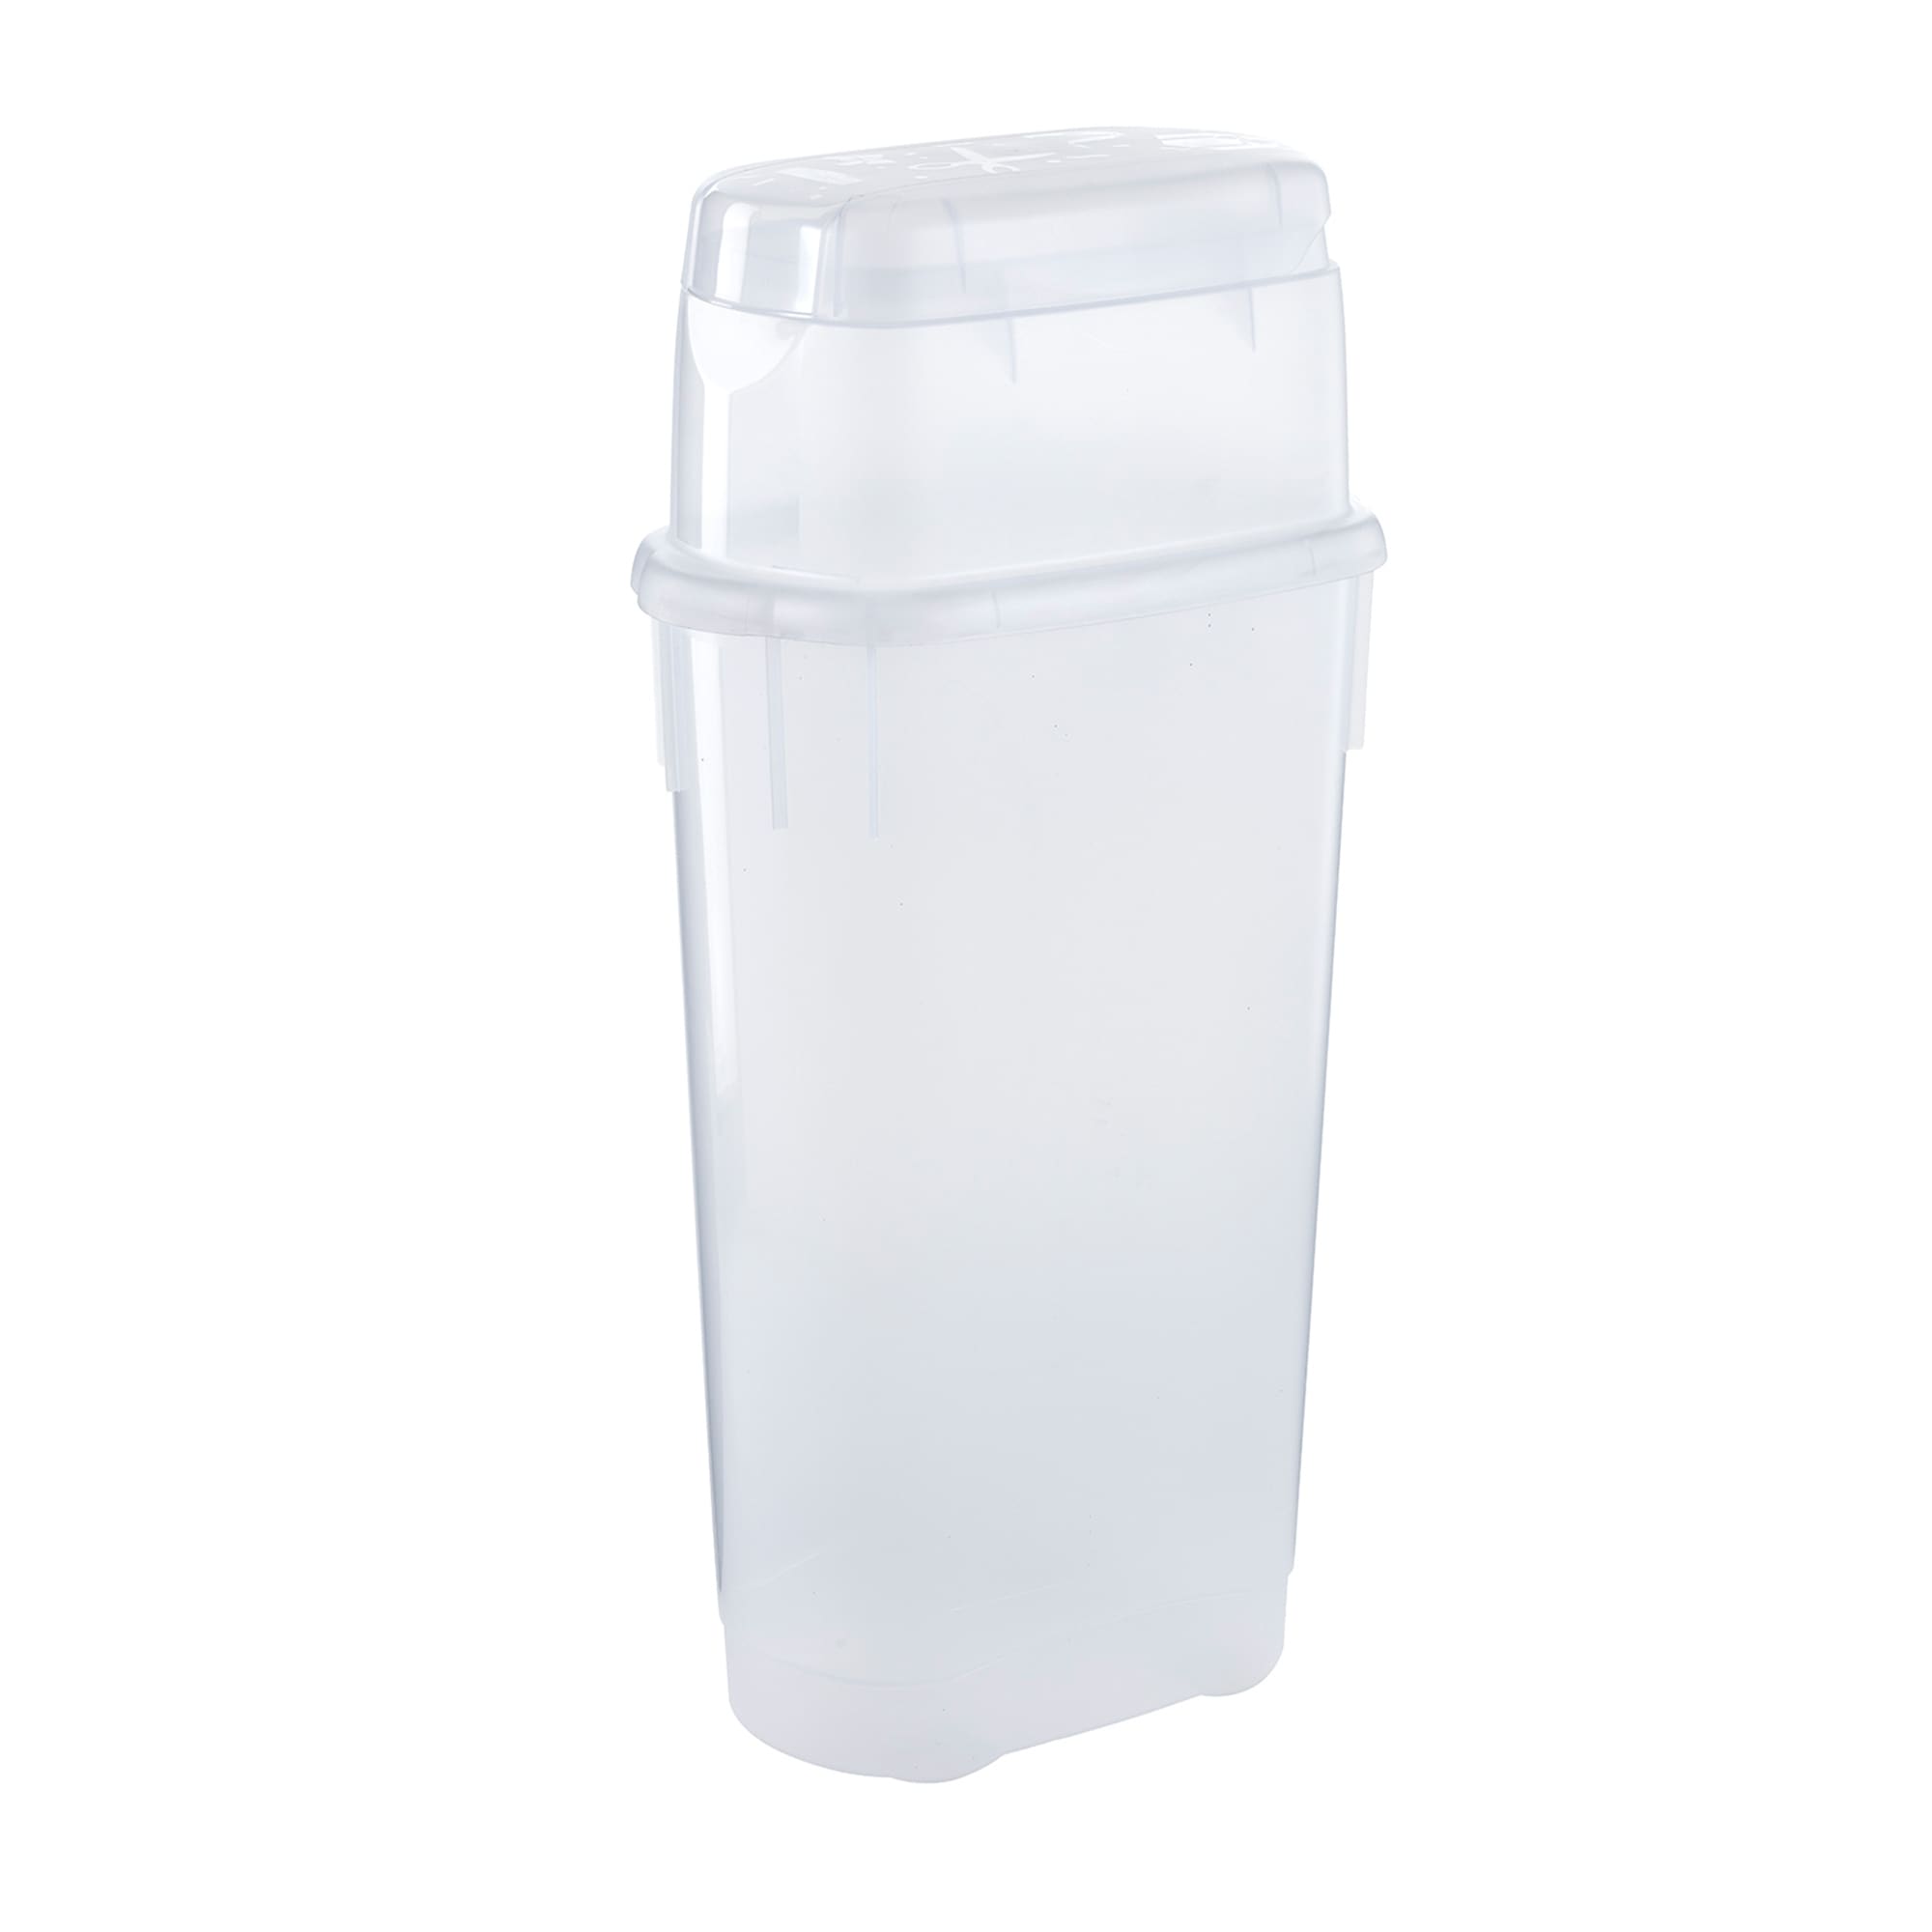 Rubbermaid Wrap N' Craft Plastic Wrapping Paper Holder Container, Clear, 1  Count - 5